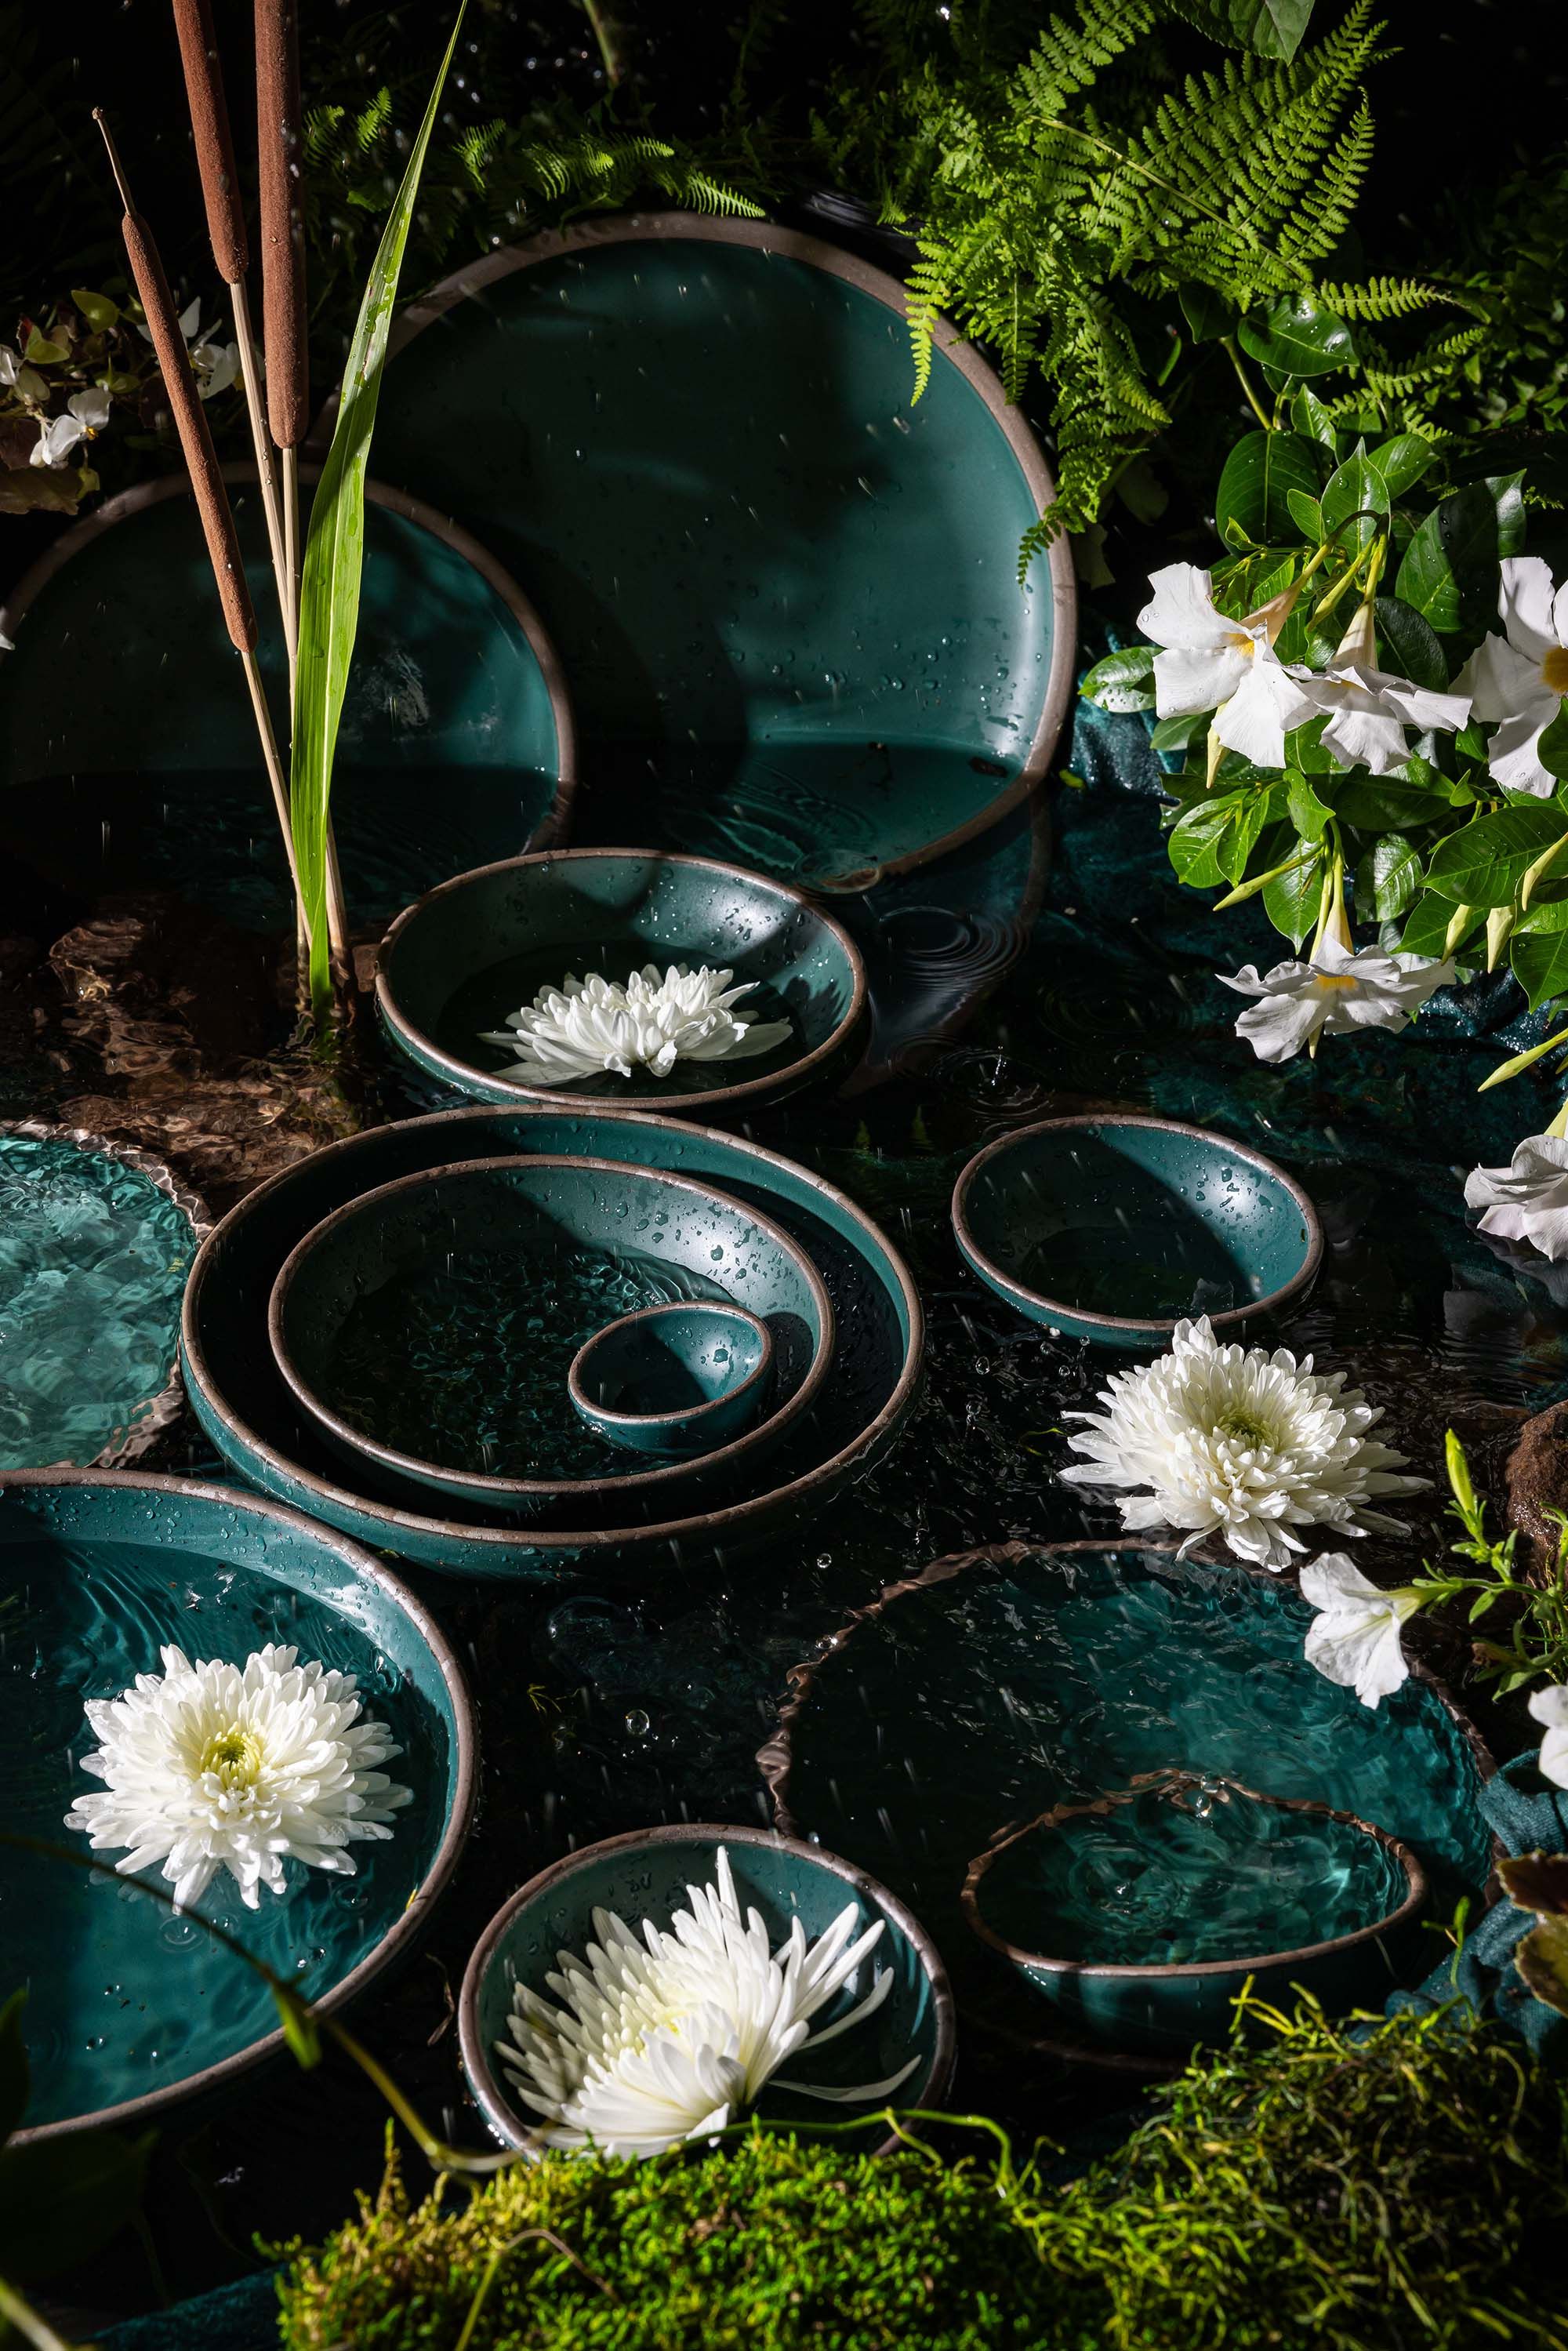 Earthy environment with ferns, water, white flowers with various plates and bowls in a deep dark teal.